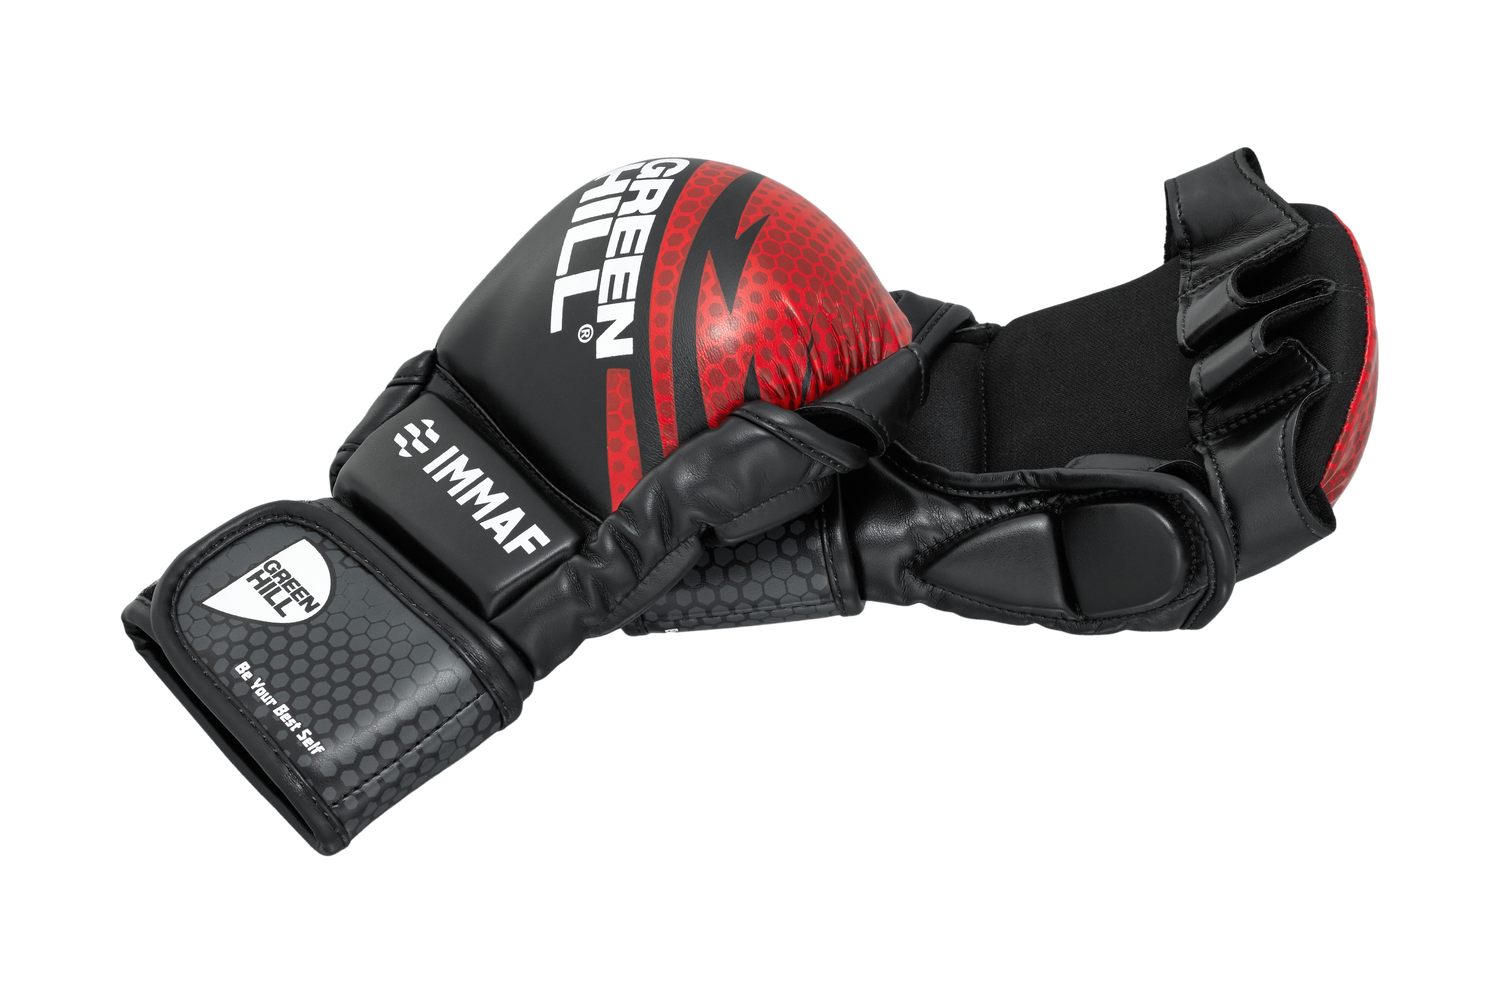 GREEN HILL IMMAF APPROVED MMA GLOVES RED